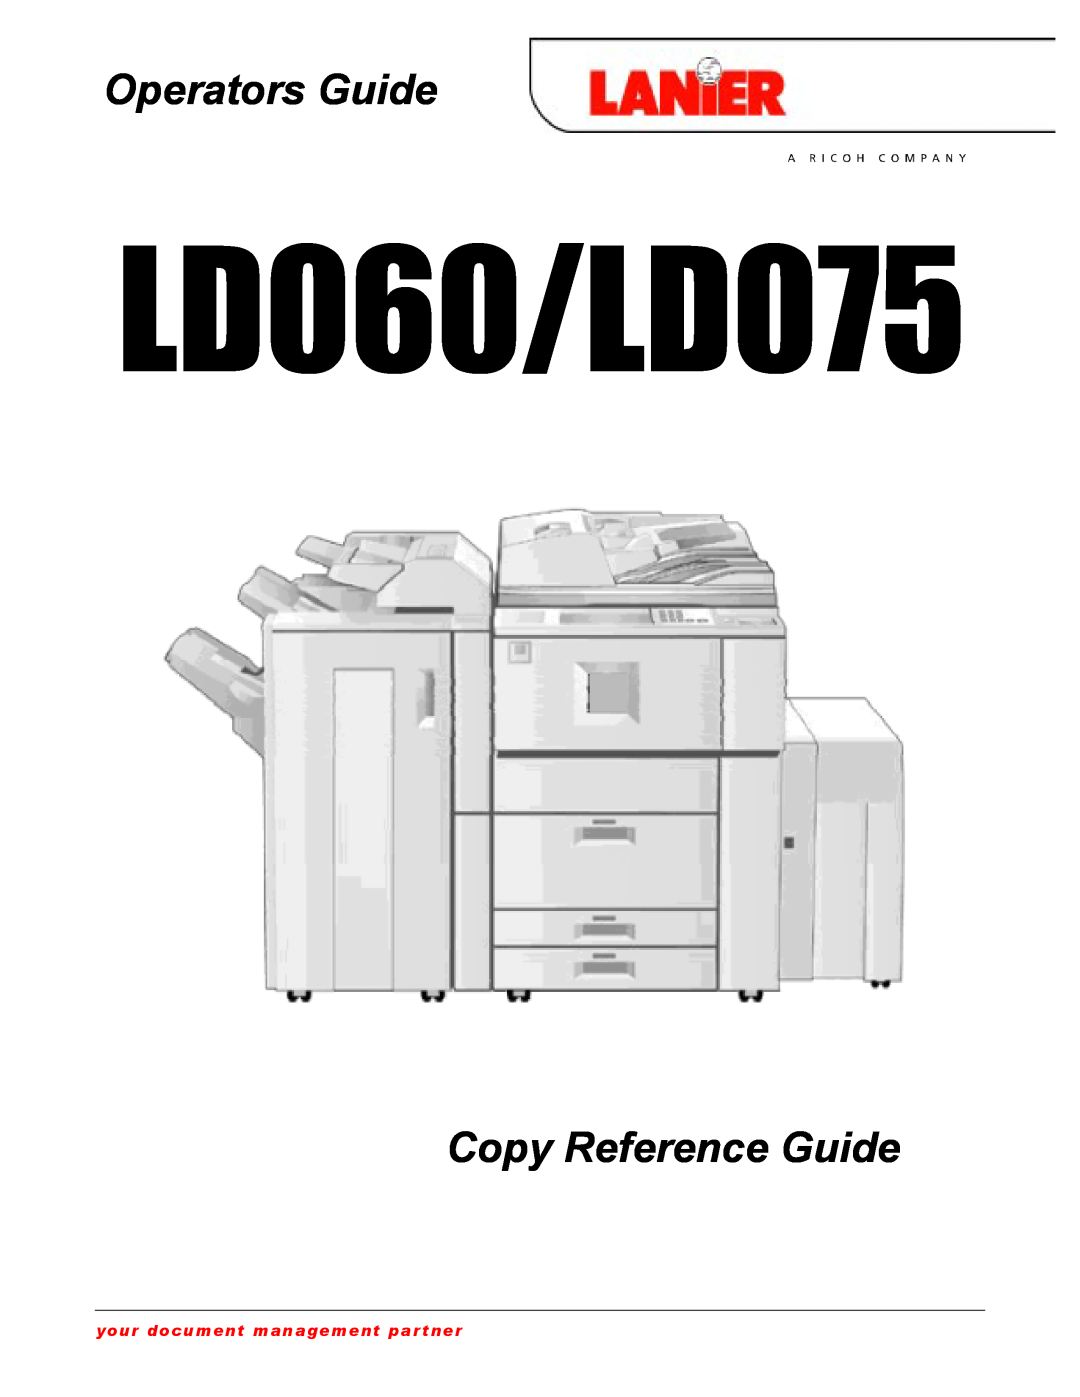 Lanier manual LD060/LD075, Operators Guide, Copy Reference Guide, your document management partner 